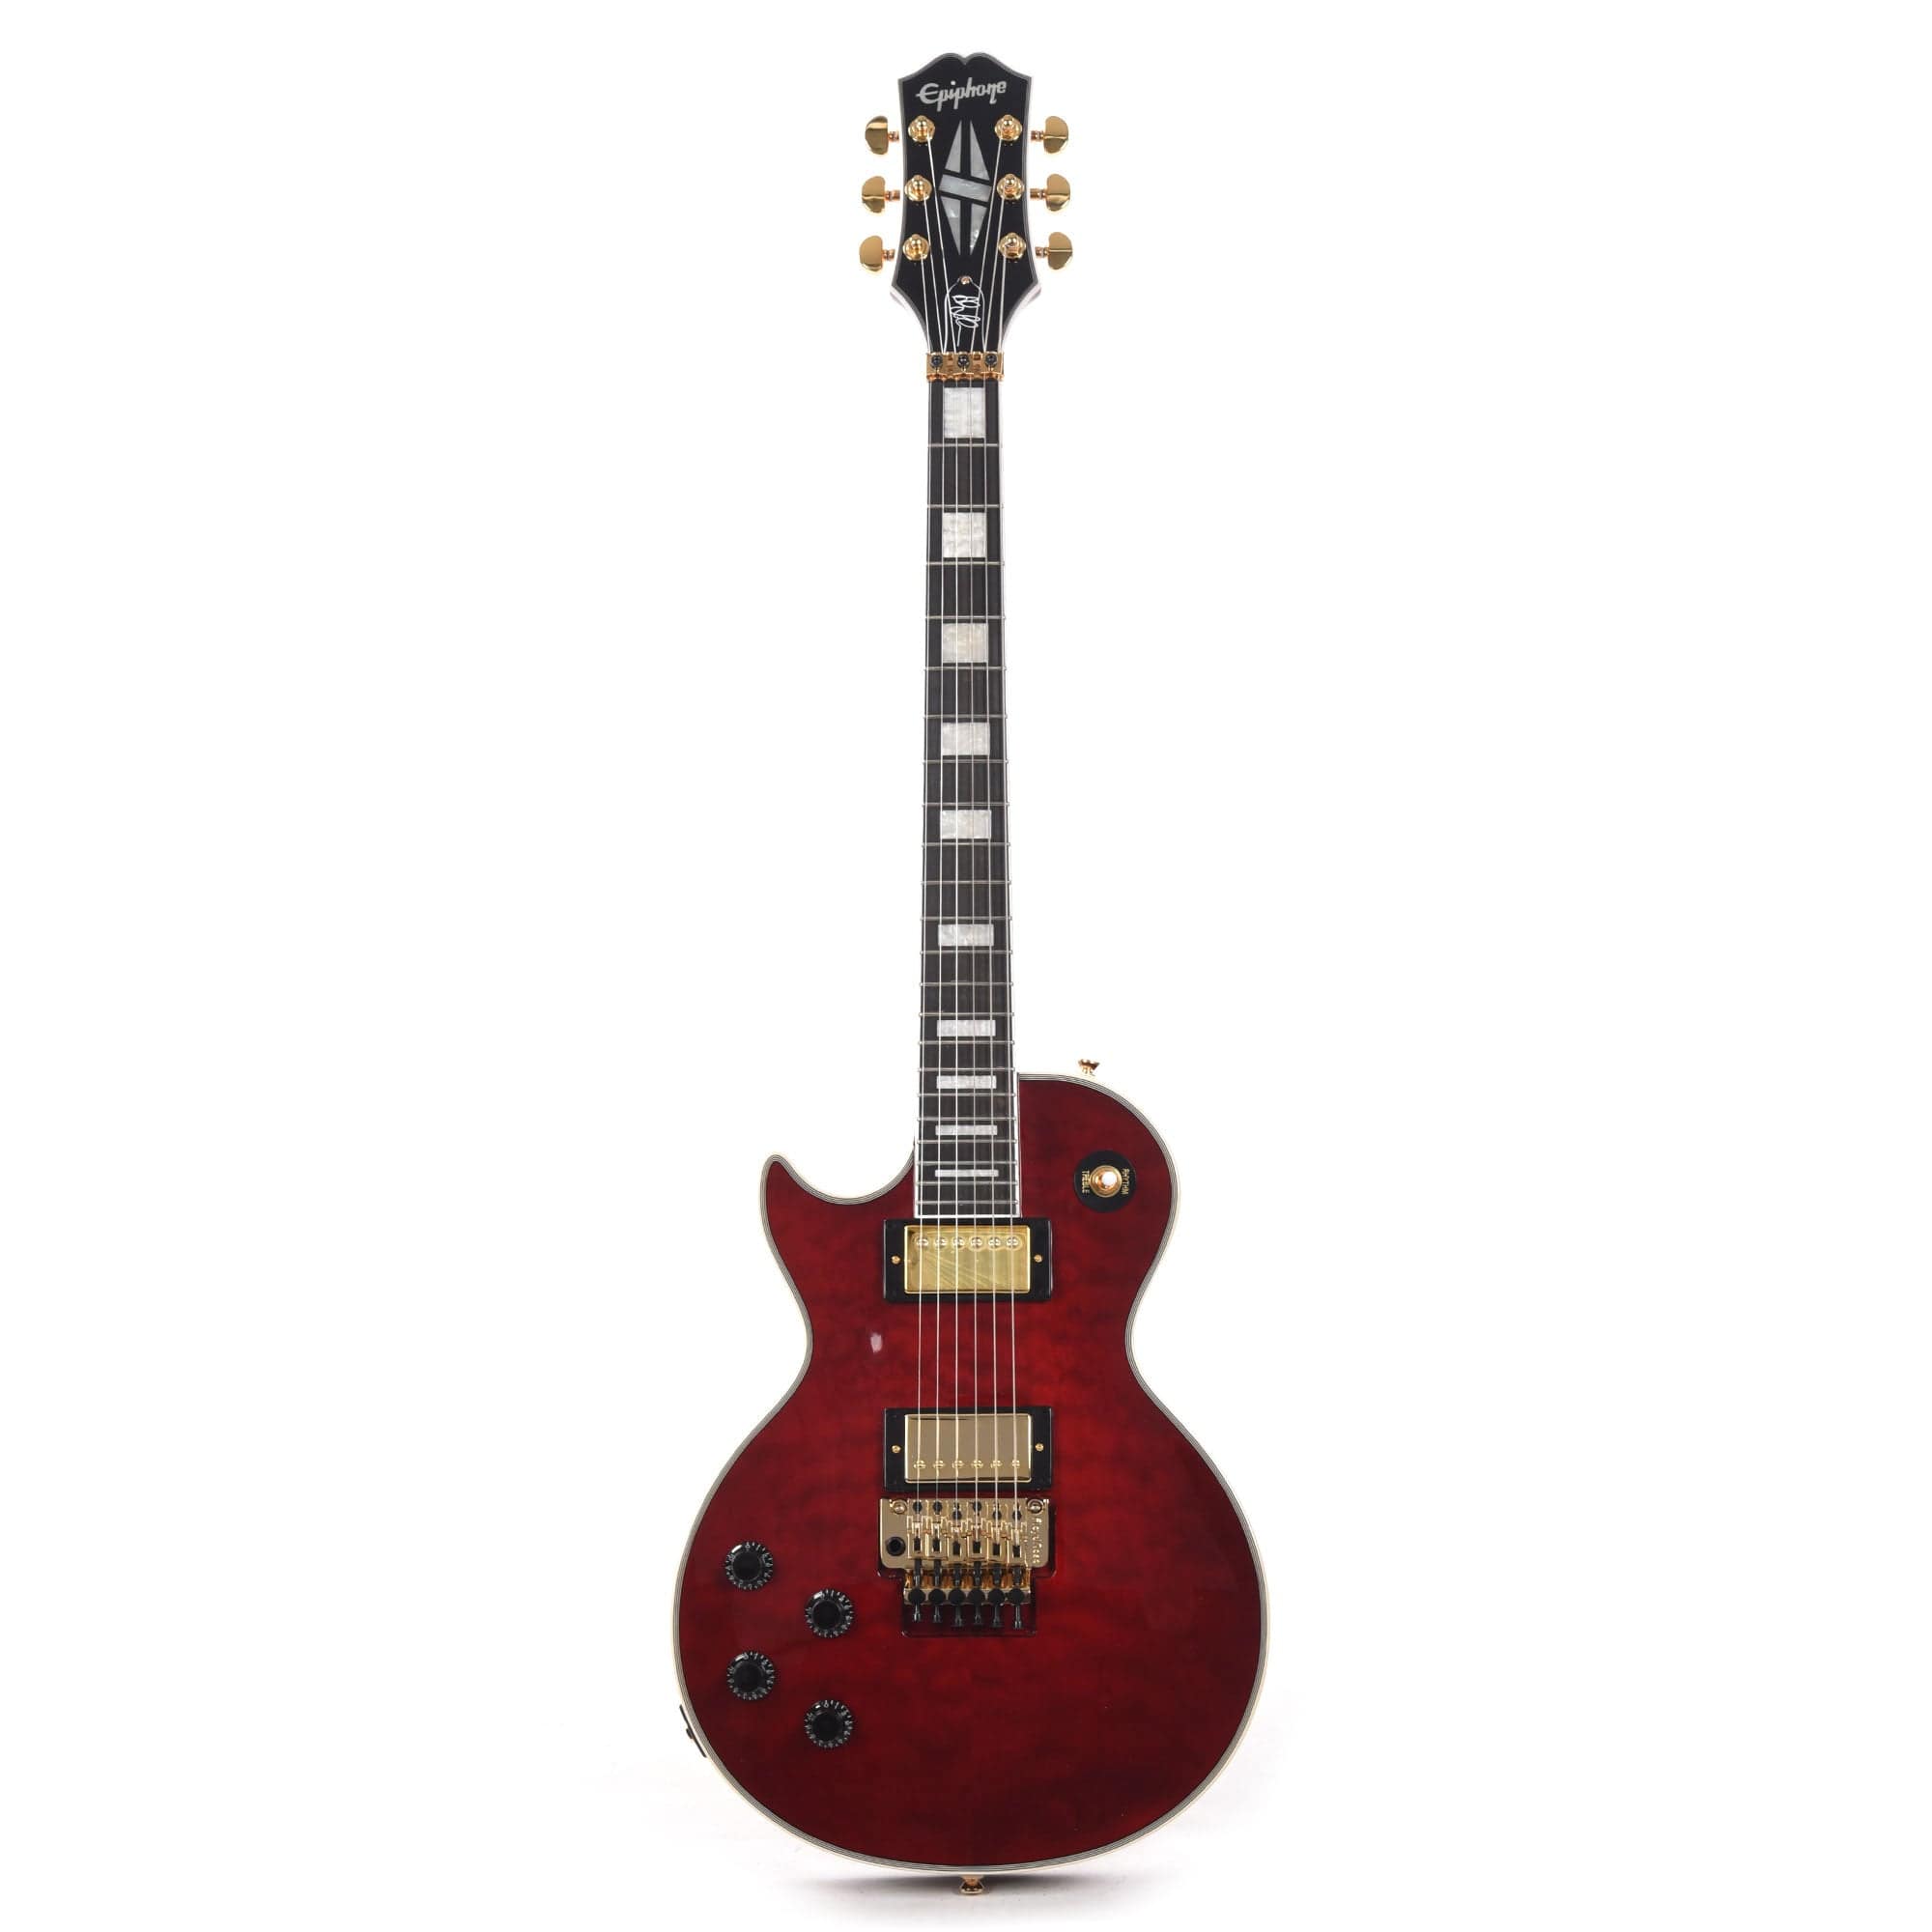 Epiphone Artist Alex Lifeson Les Paul Custom Axcess LEFTY Quilt Ruby Electric Guitars / Solid Body